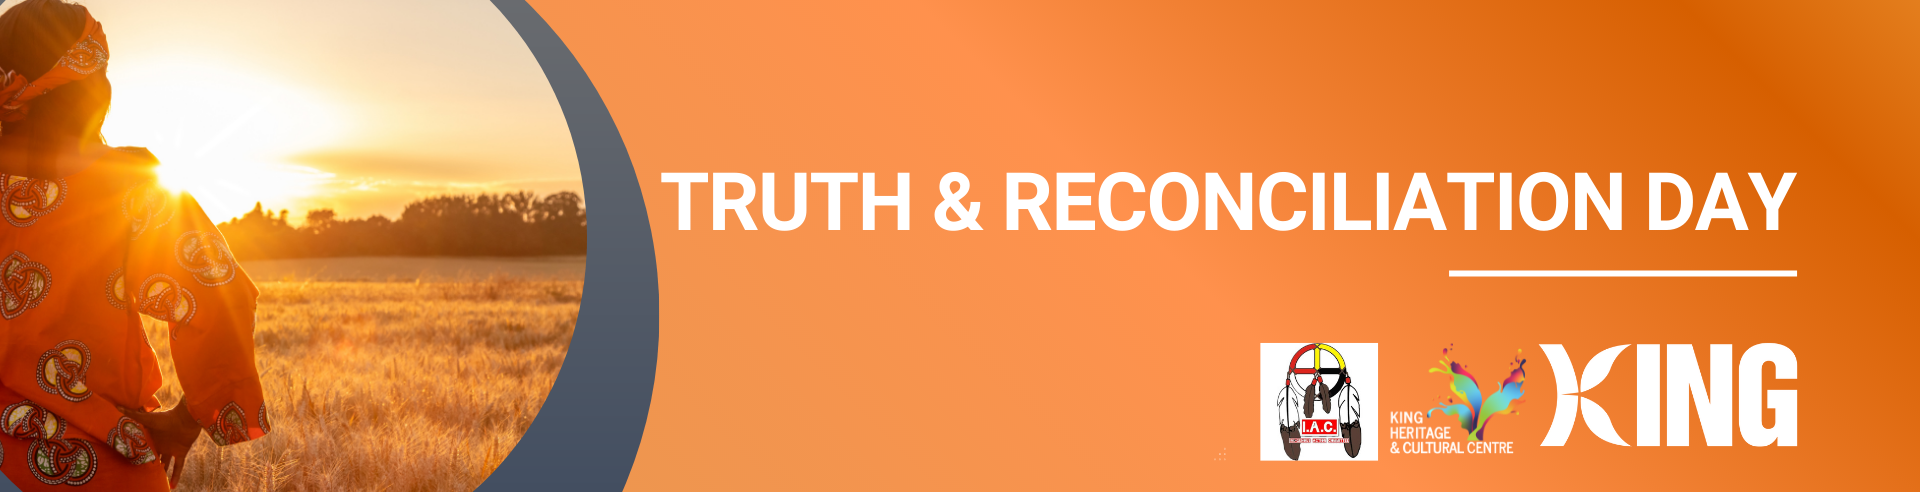 Truth & Reconciliation Day